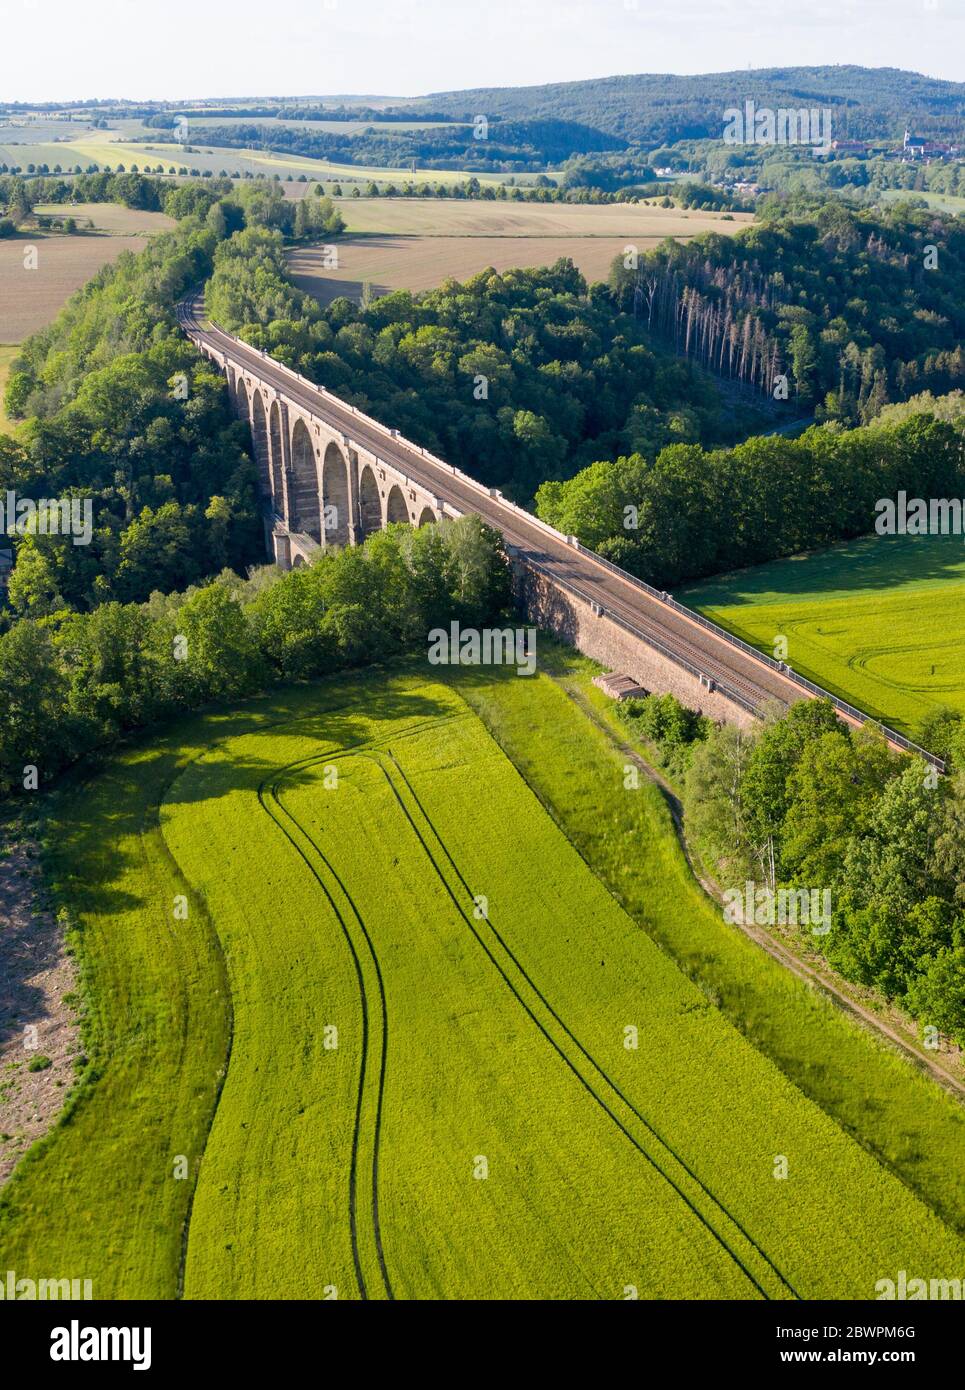 14 September 2017, Saxony, Göhren: With the Göhren Viaduct, the Leipzig-Chemnitz railway line crosses the Zwickauer Mulde. The railway bridge, originally 512 metres long and 68 metres high, is the third largest of these structures in Saxony. For years, only regional trains have been running on the only slightly electrified line between Leipzig and Chemnitz. The planned extension of the line will not begin until 2025 at the earliest. If conditions are favourable, the line could be double-tracked and electrified three years later. (Aerial photograph with drone) Photo: Jan Woitas/dpa-Zentralbild/ Stock Photo